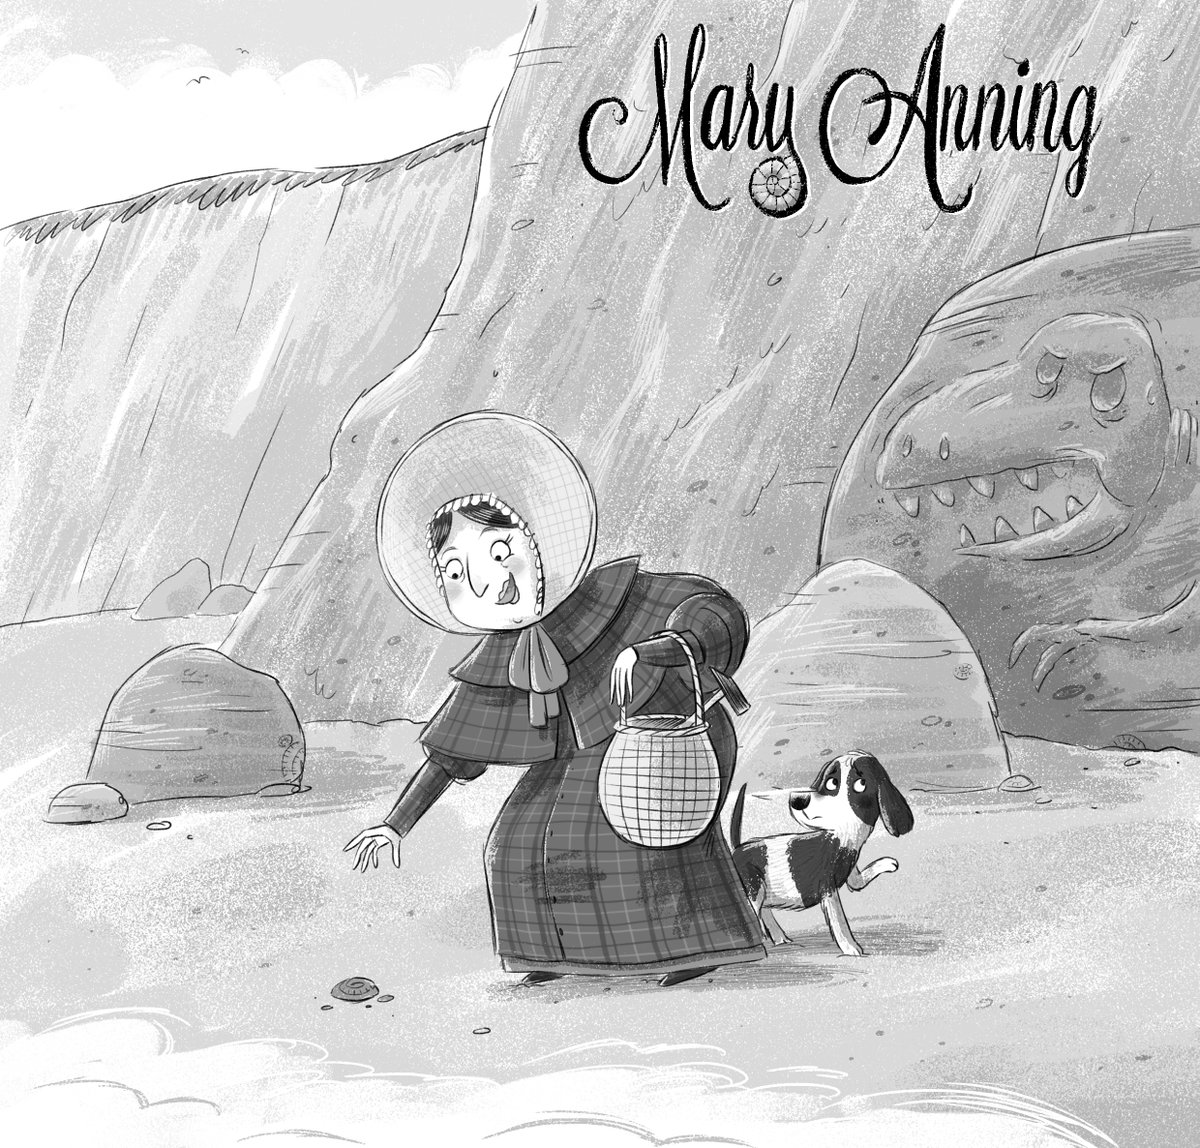 My portfolio on my agents website has been updated recently with my #picturebook work and some #youngfiction and #educational art too, including this Mary Anning piece 😊🦖🦕 RTs appreciated
thebrightagency.com/us/publishing/…

#illustration #ChildrensBooks #childrensfiction #kidlitart